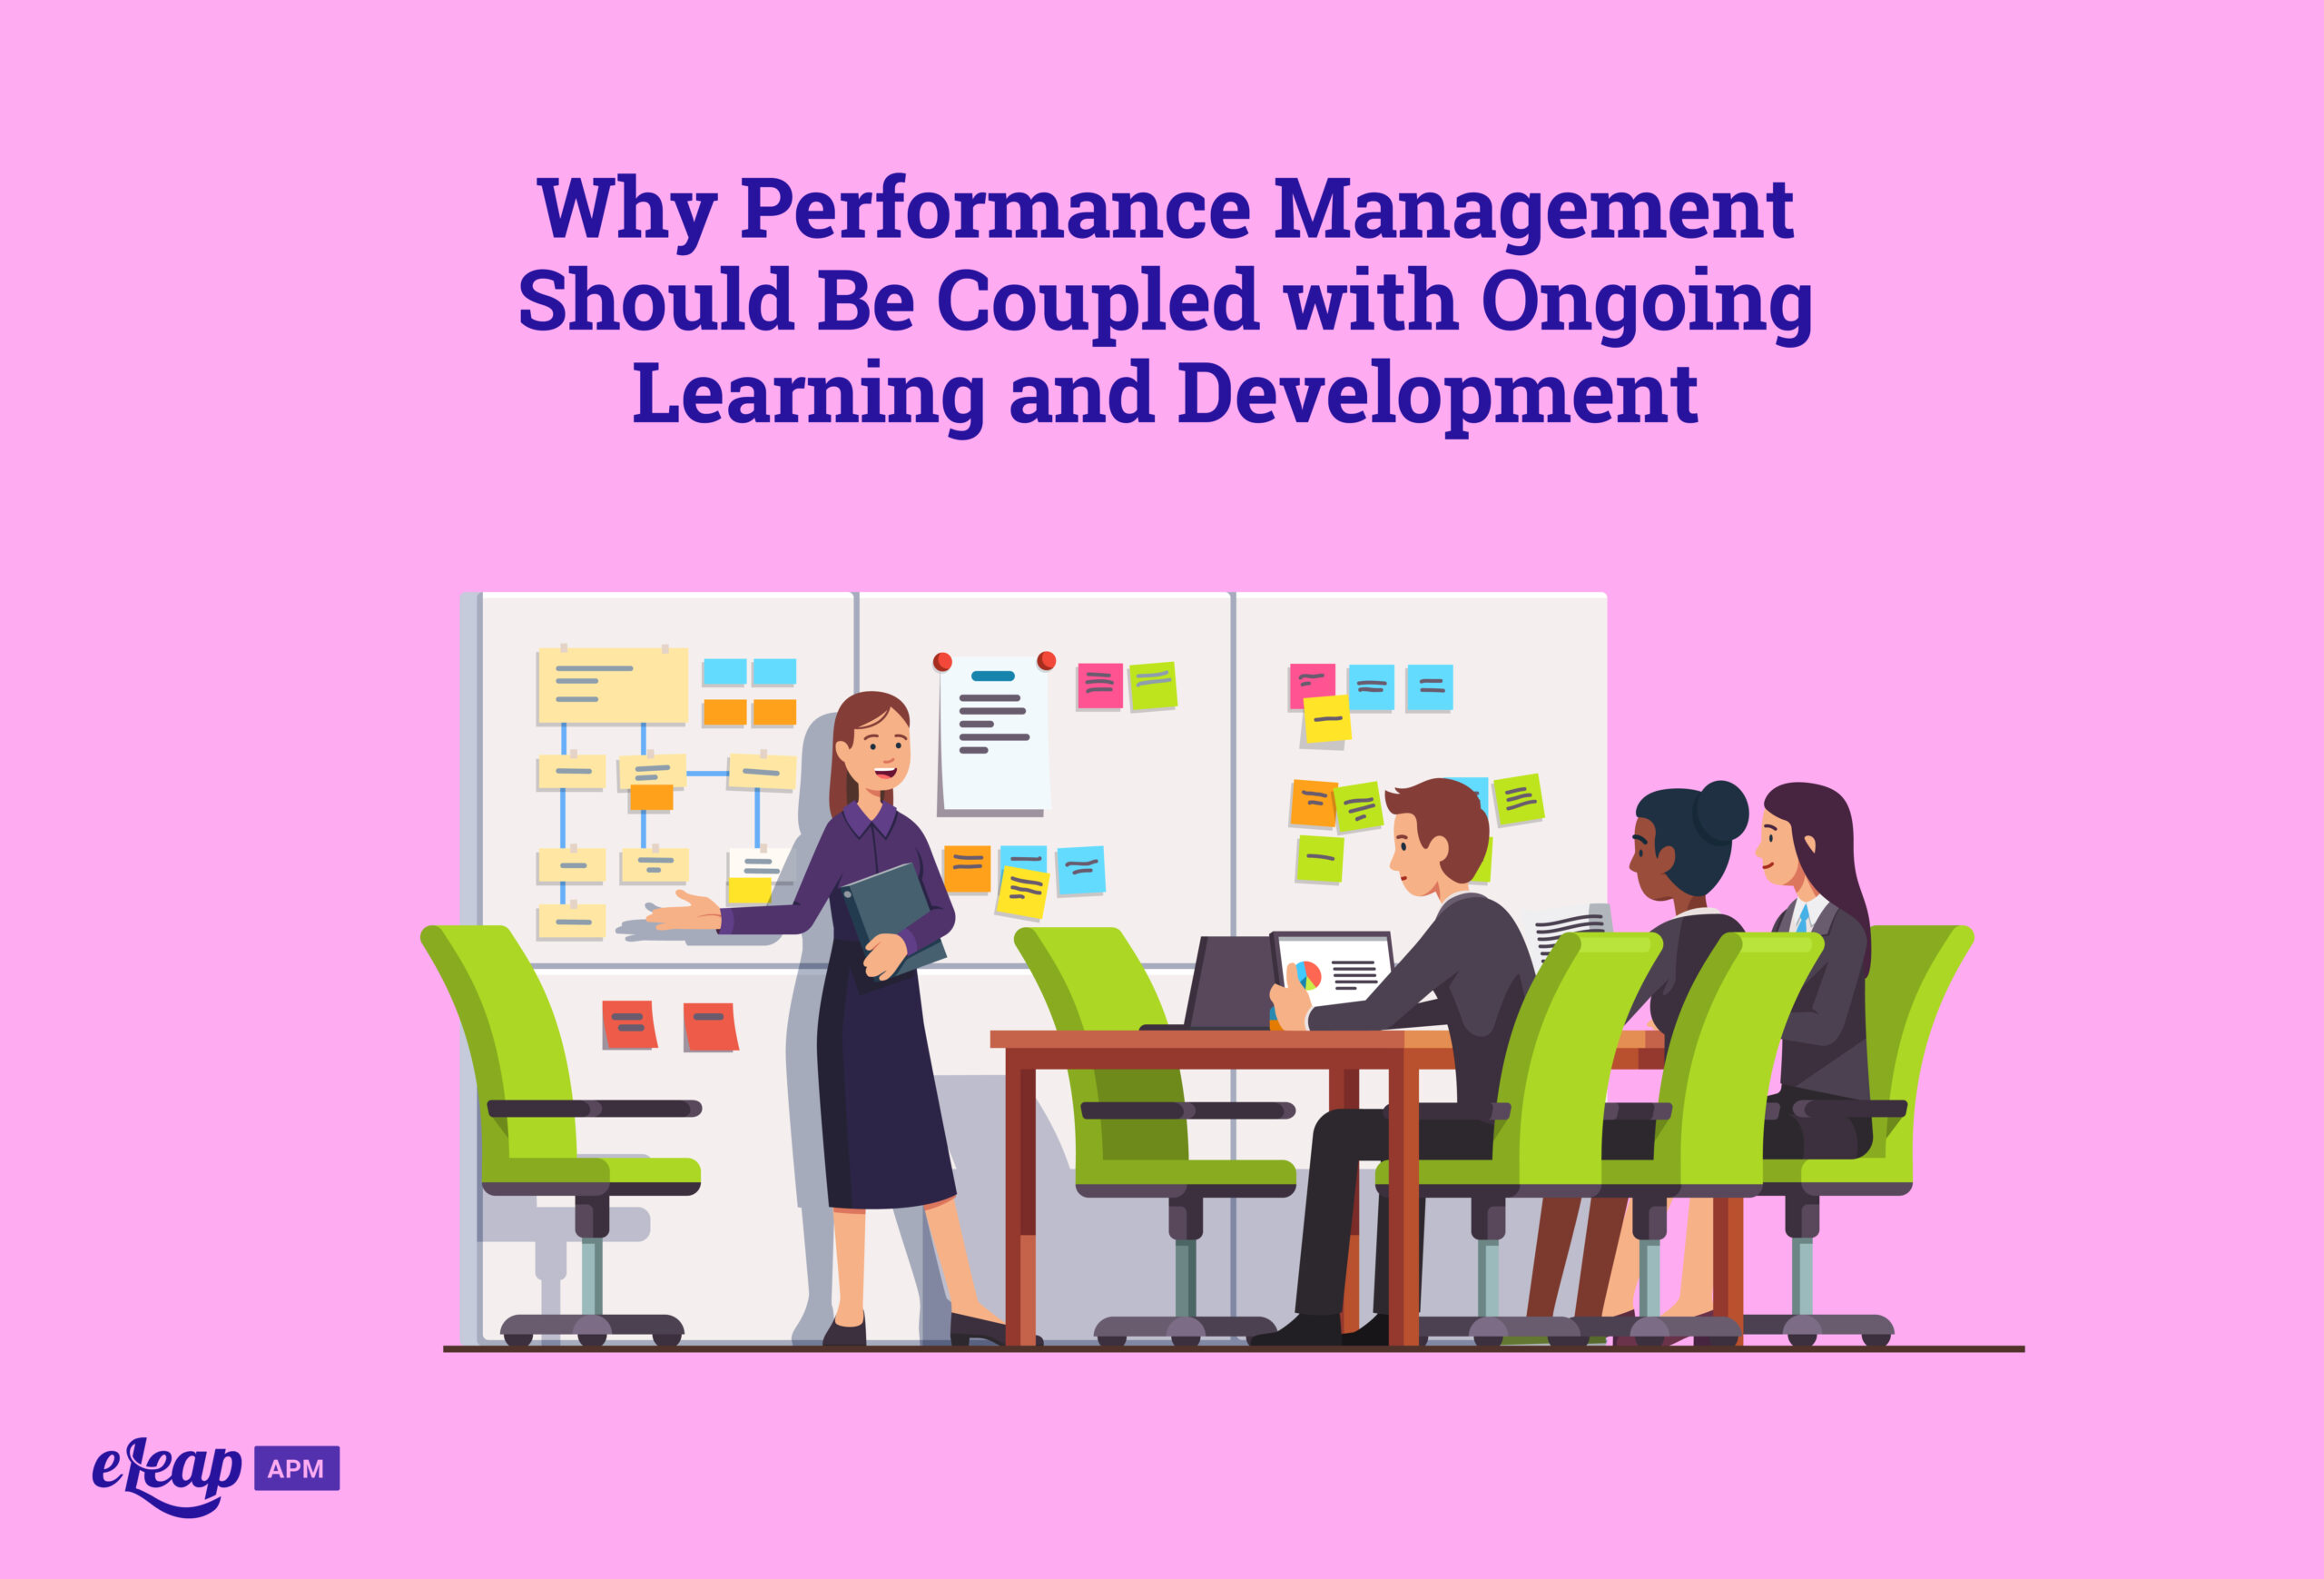 Why Performance Management Should Be Coupled with Ongoing Learning and Development